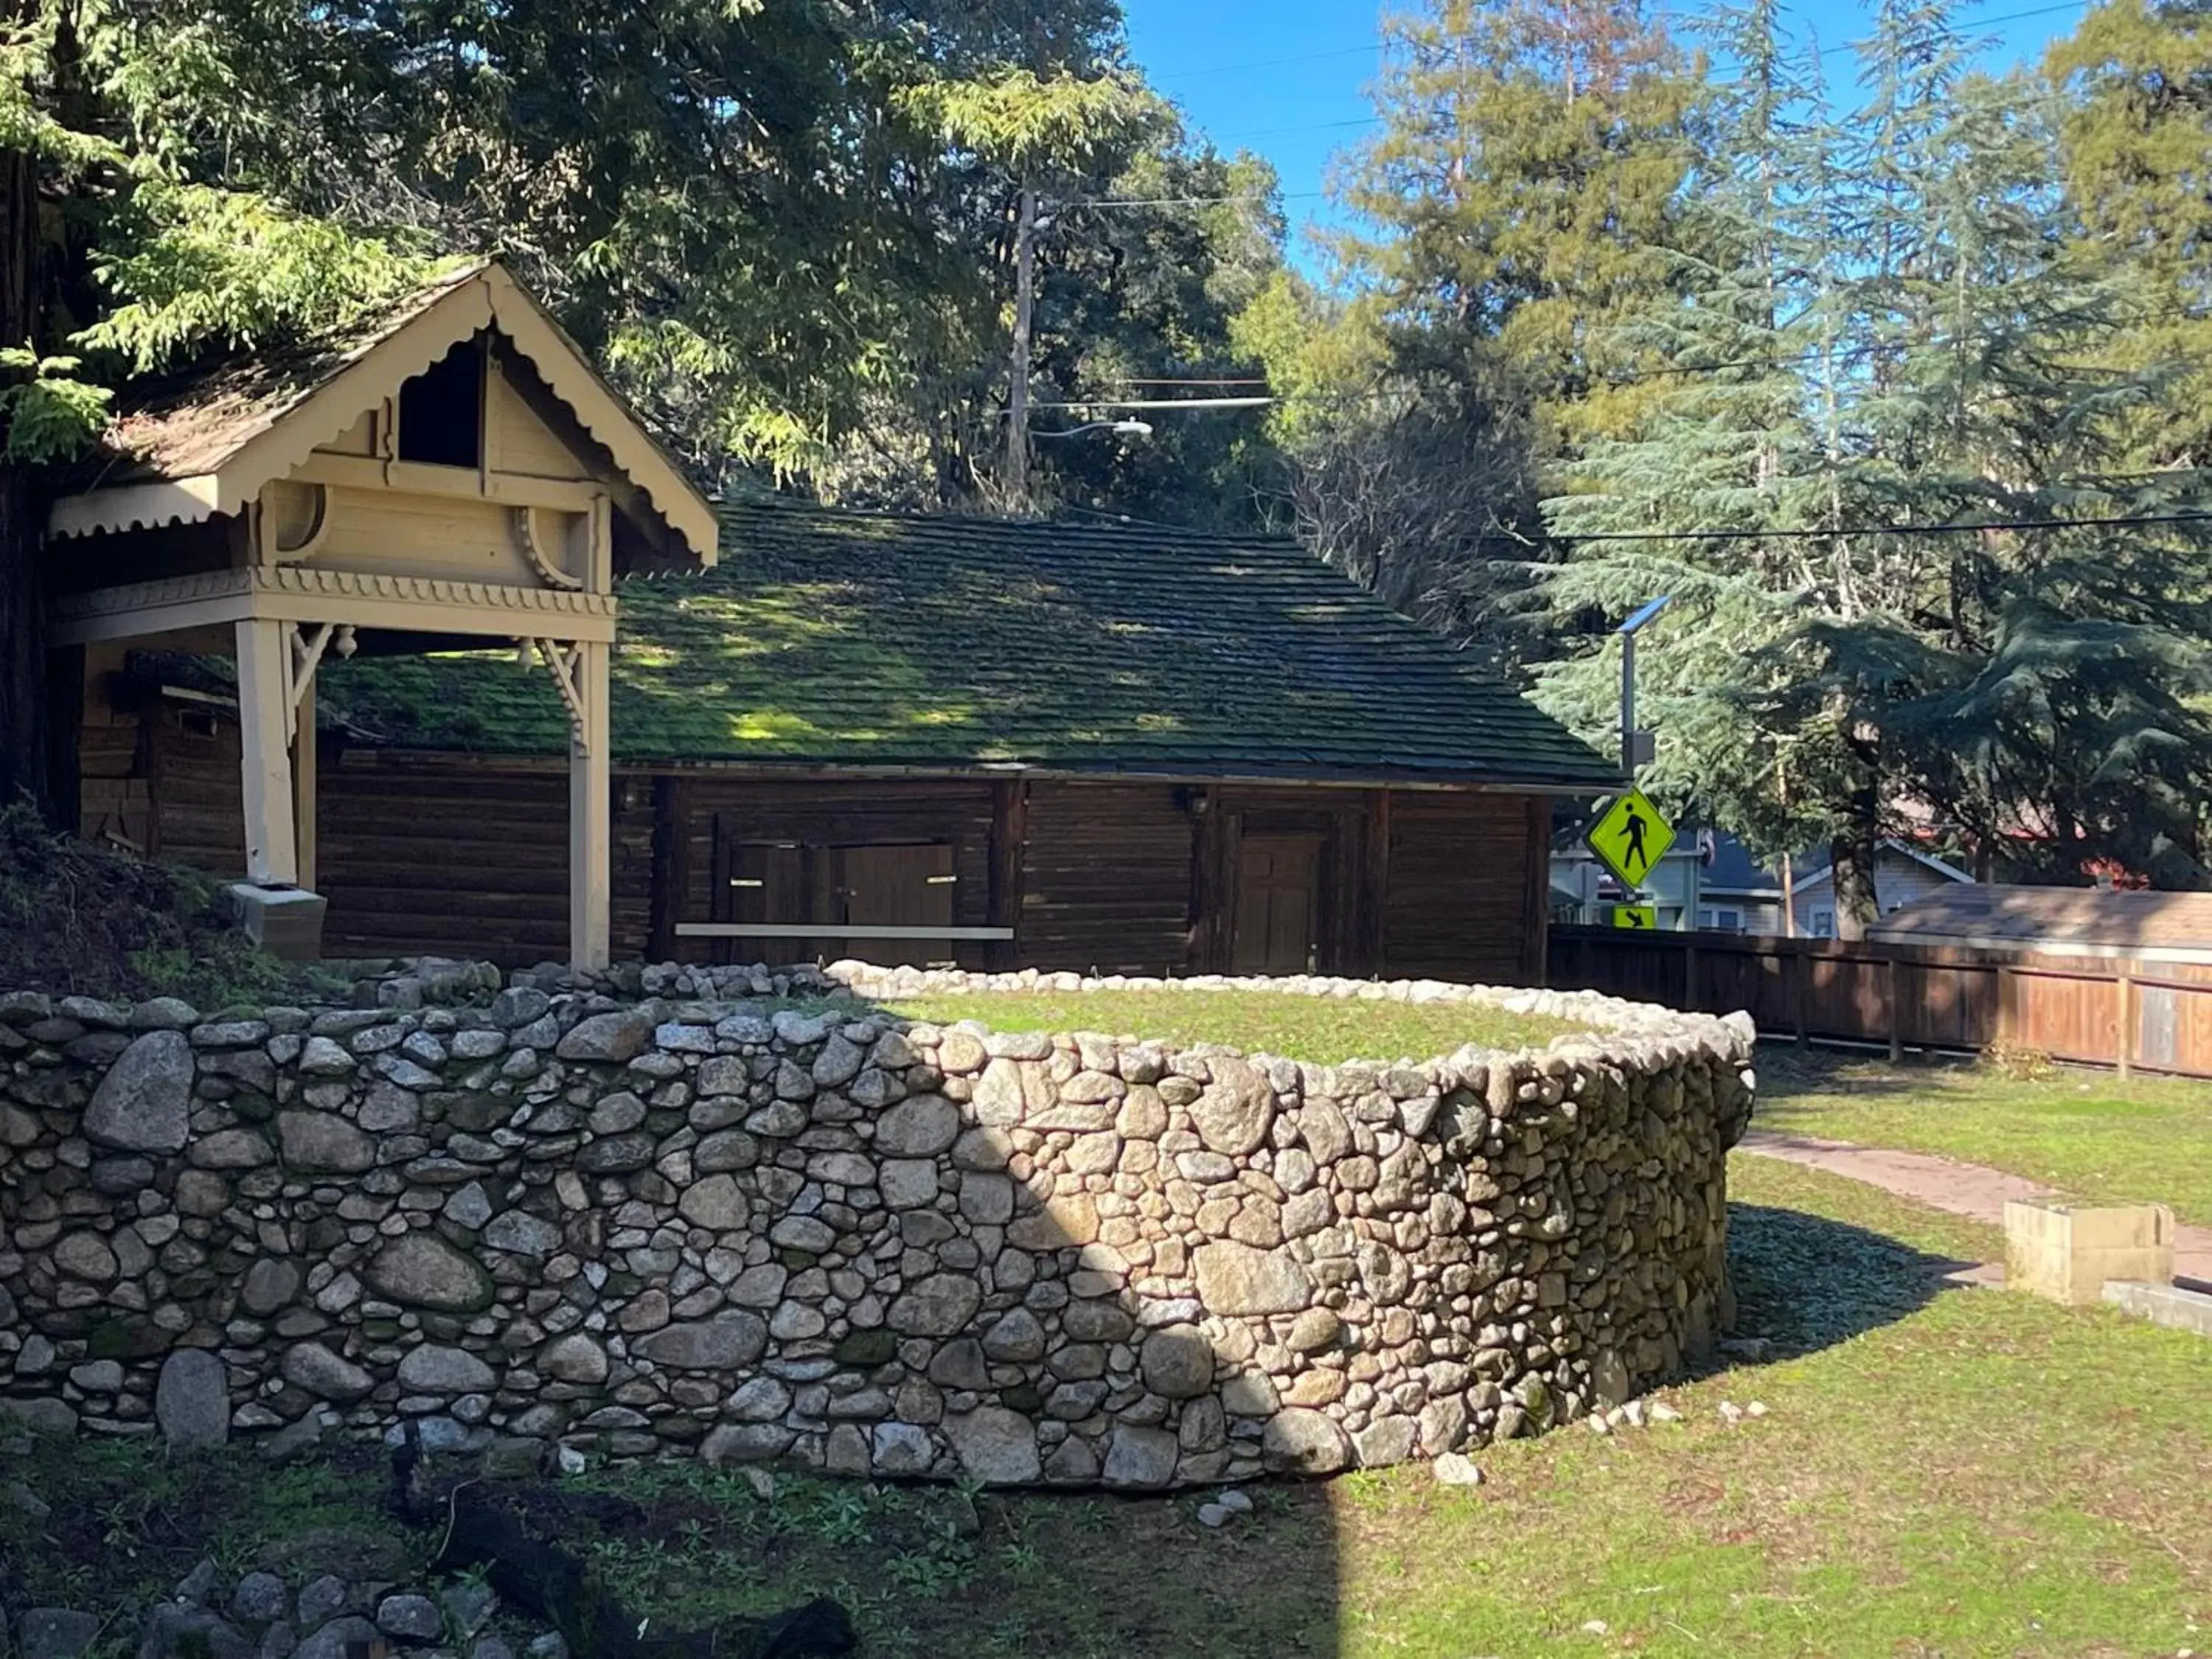 Property Building in The Historic Brookdale Lodge, Santa Cruz Mountains